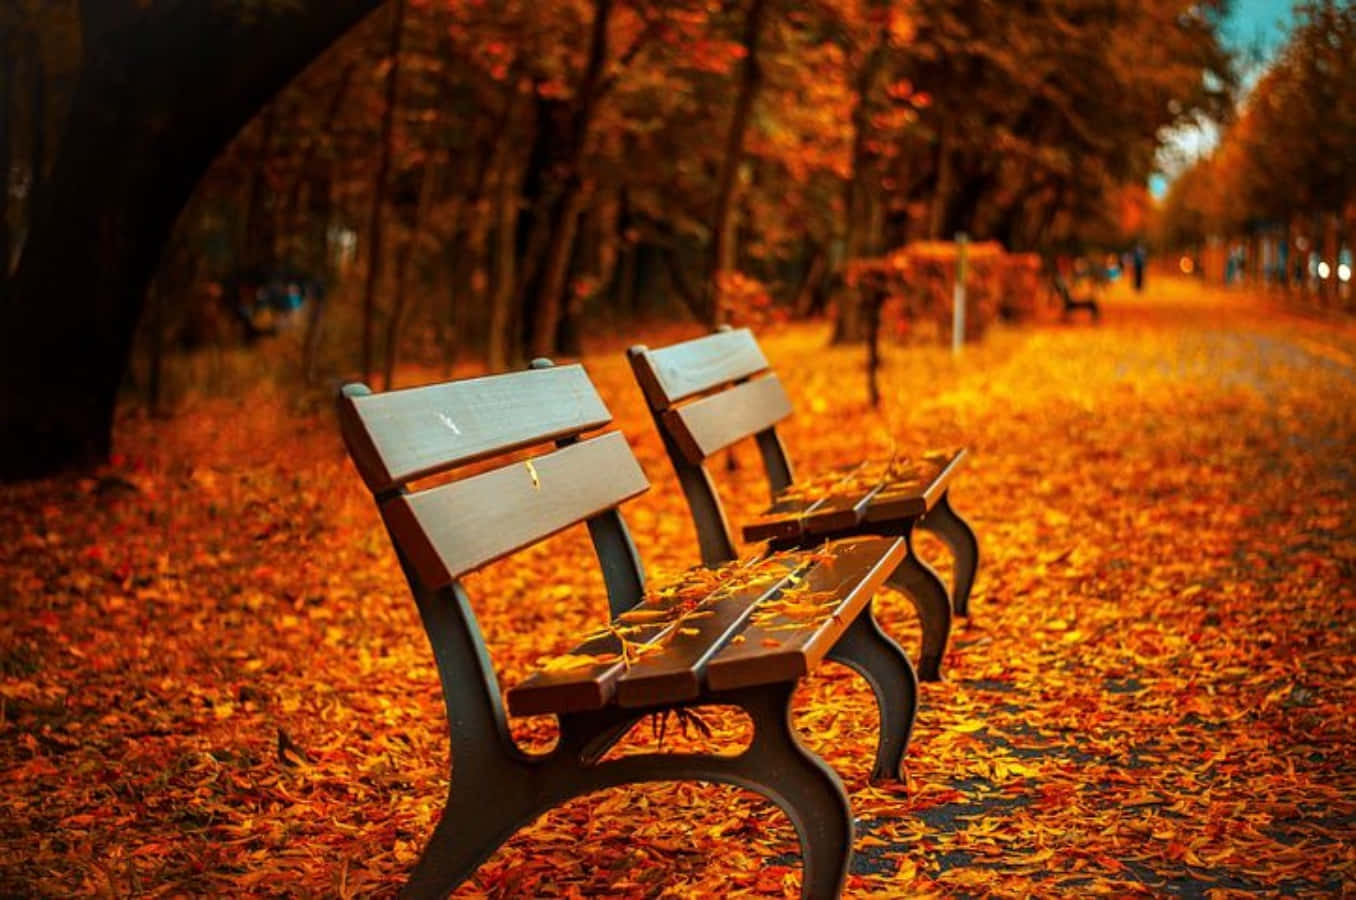 Two Benches In The Park With Autumn Leaves